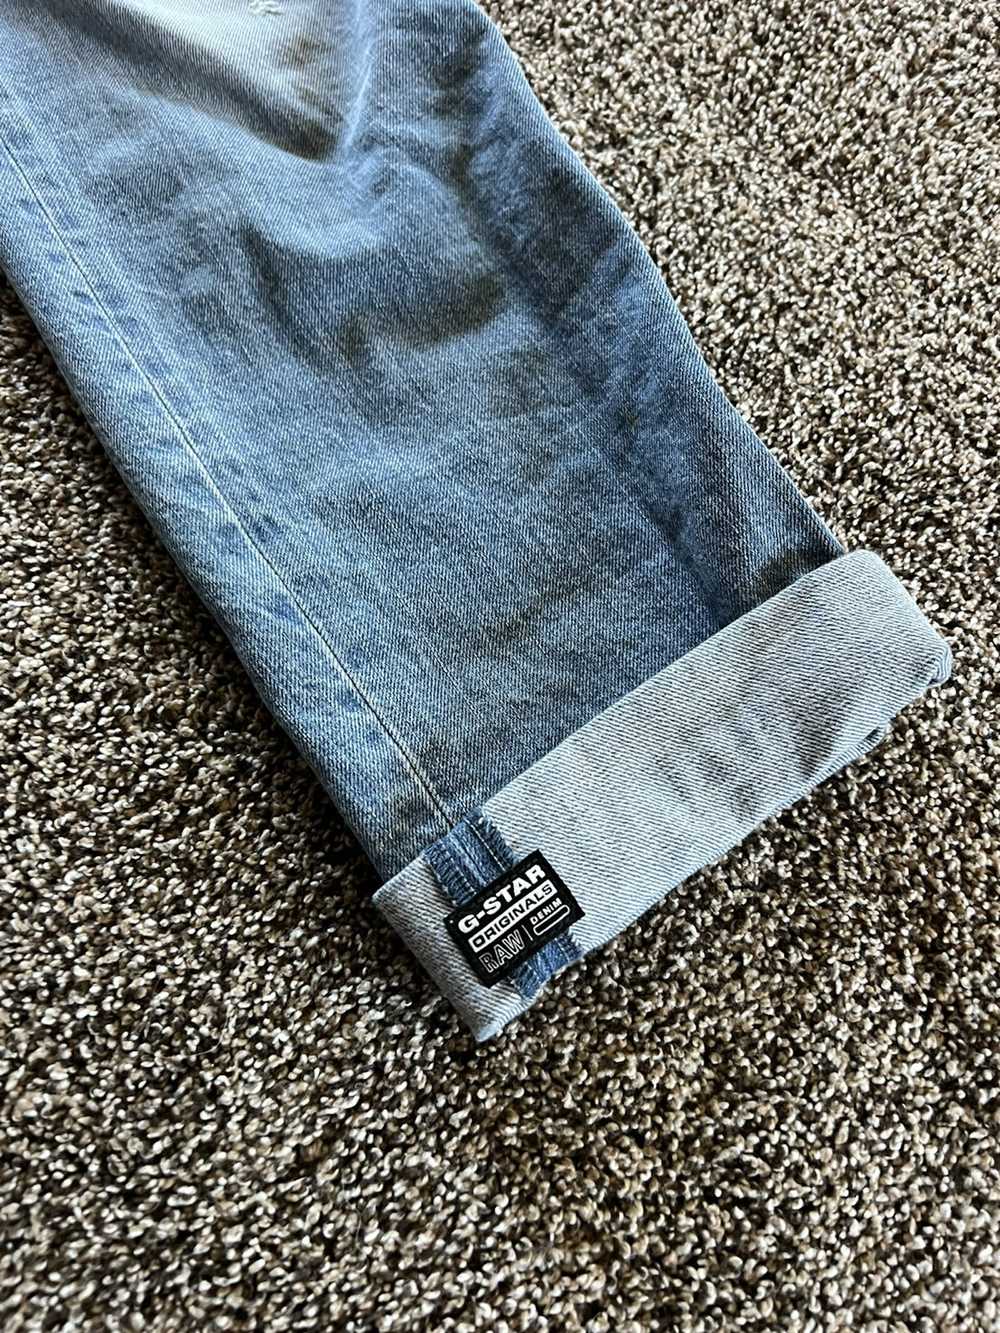 G Star Raw A-Staq Tapered Jeans - image 3